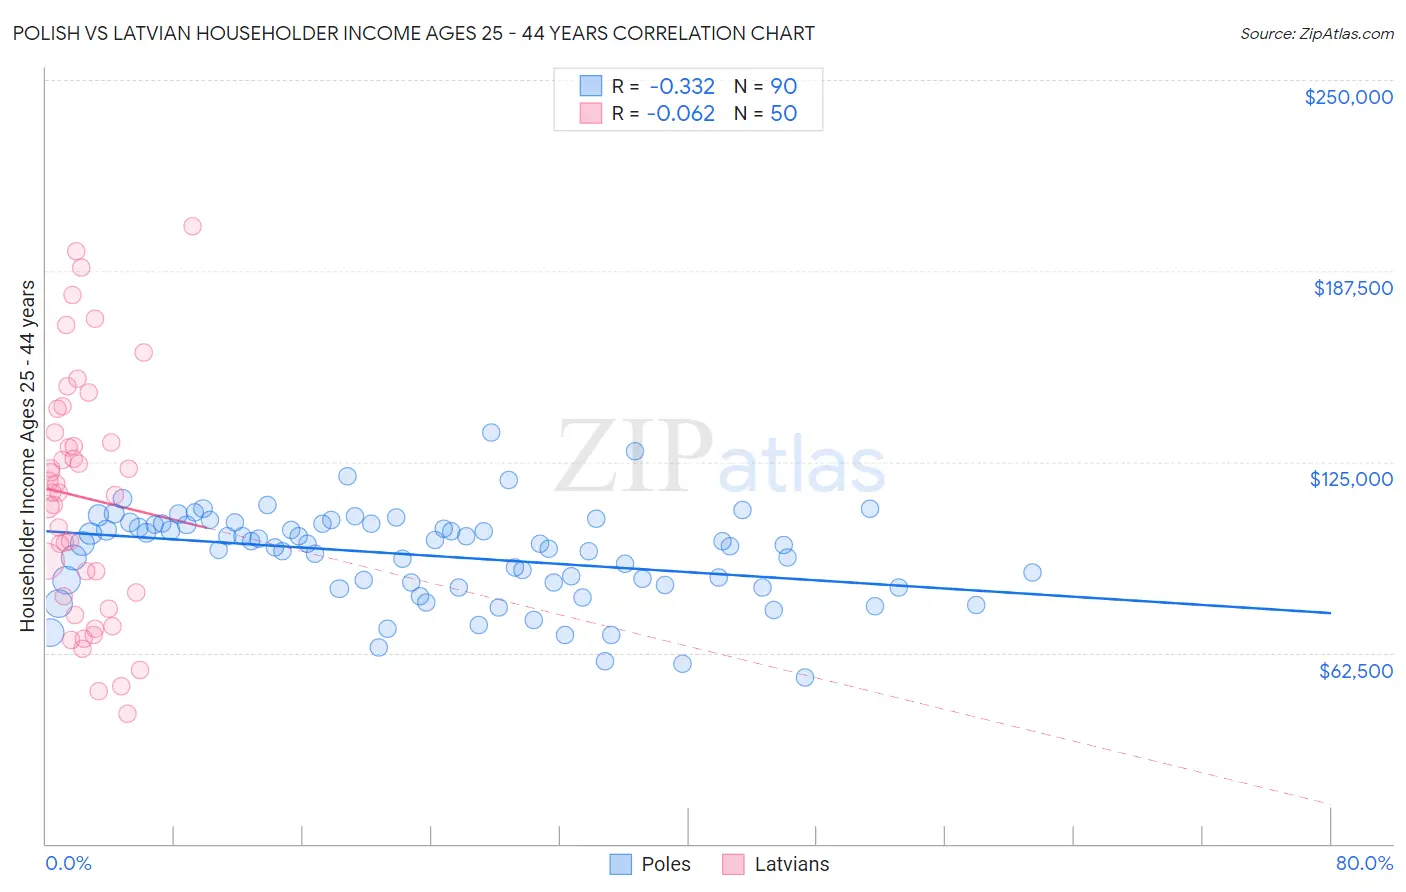 Polish vs Latvian Householder Income Ages 25 - 44 years